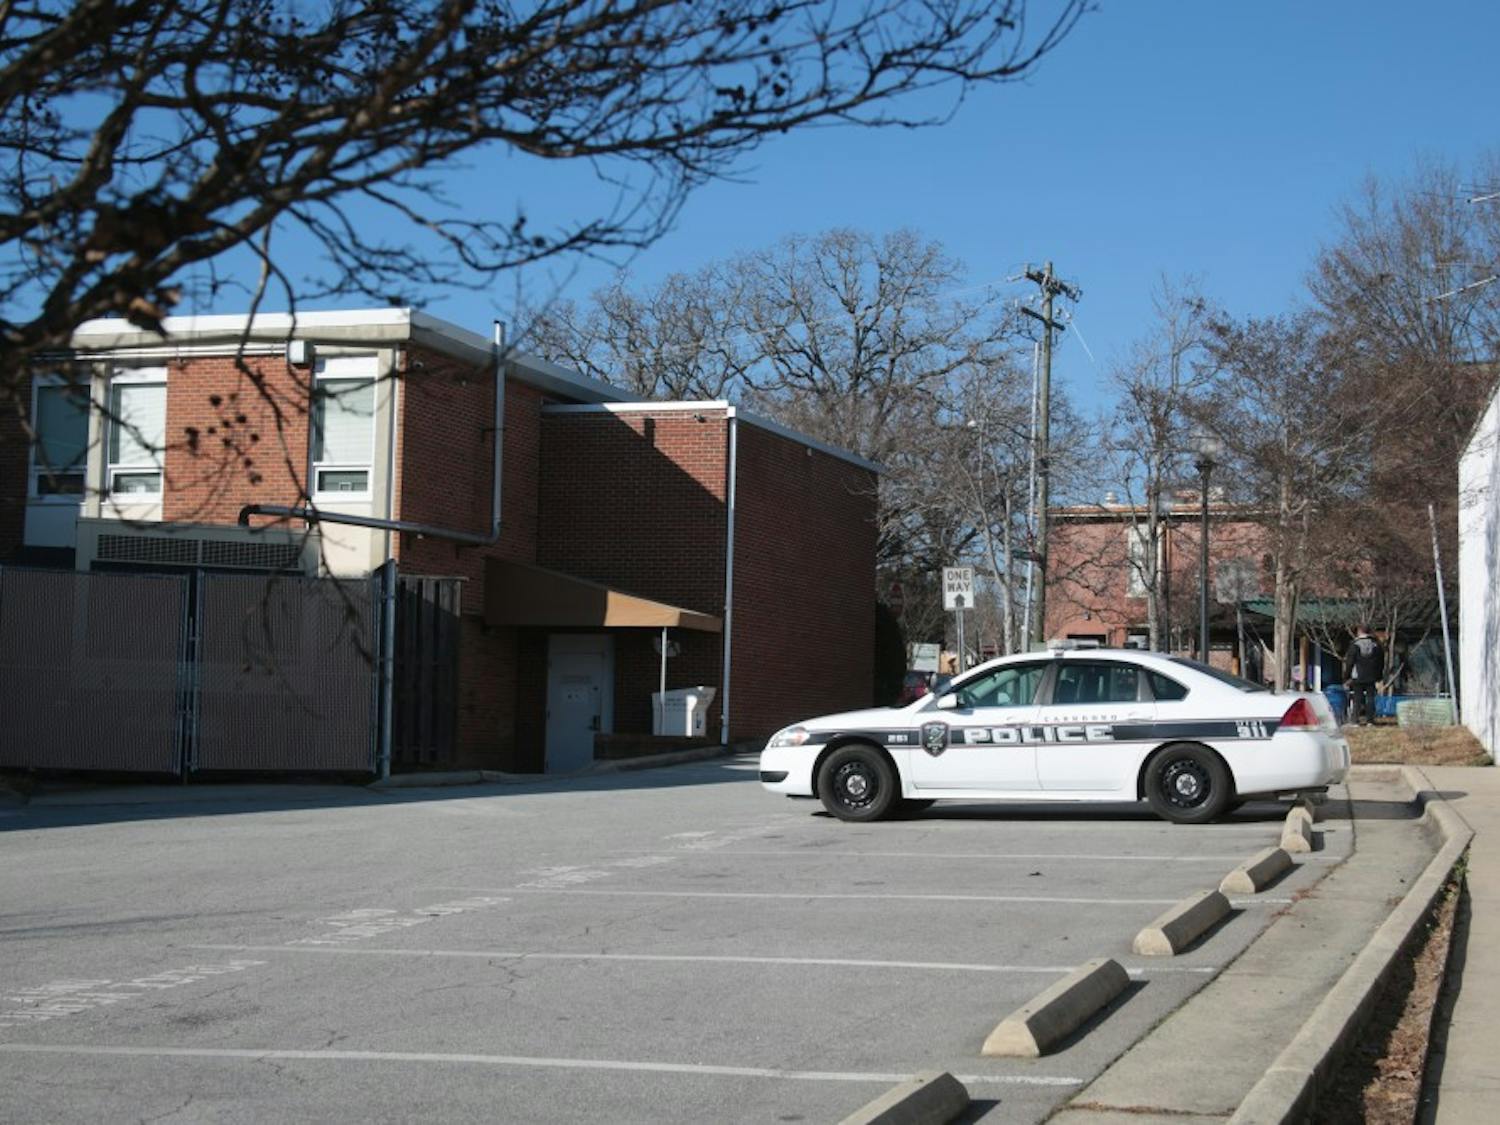 The Carrboro Police Department is pictured on January 15, 2018.